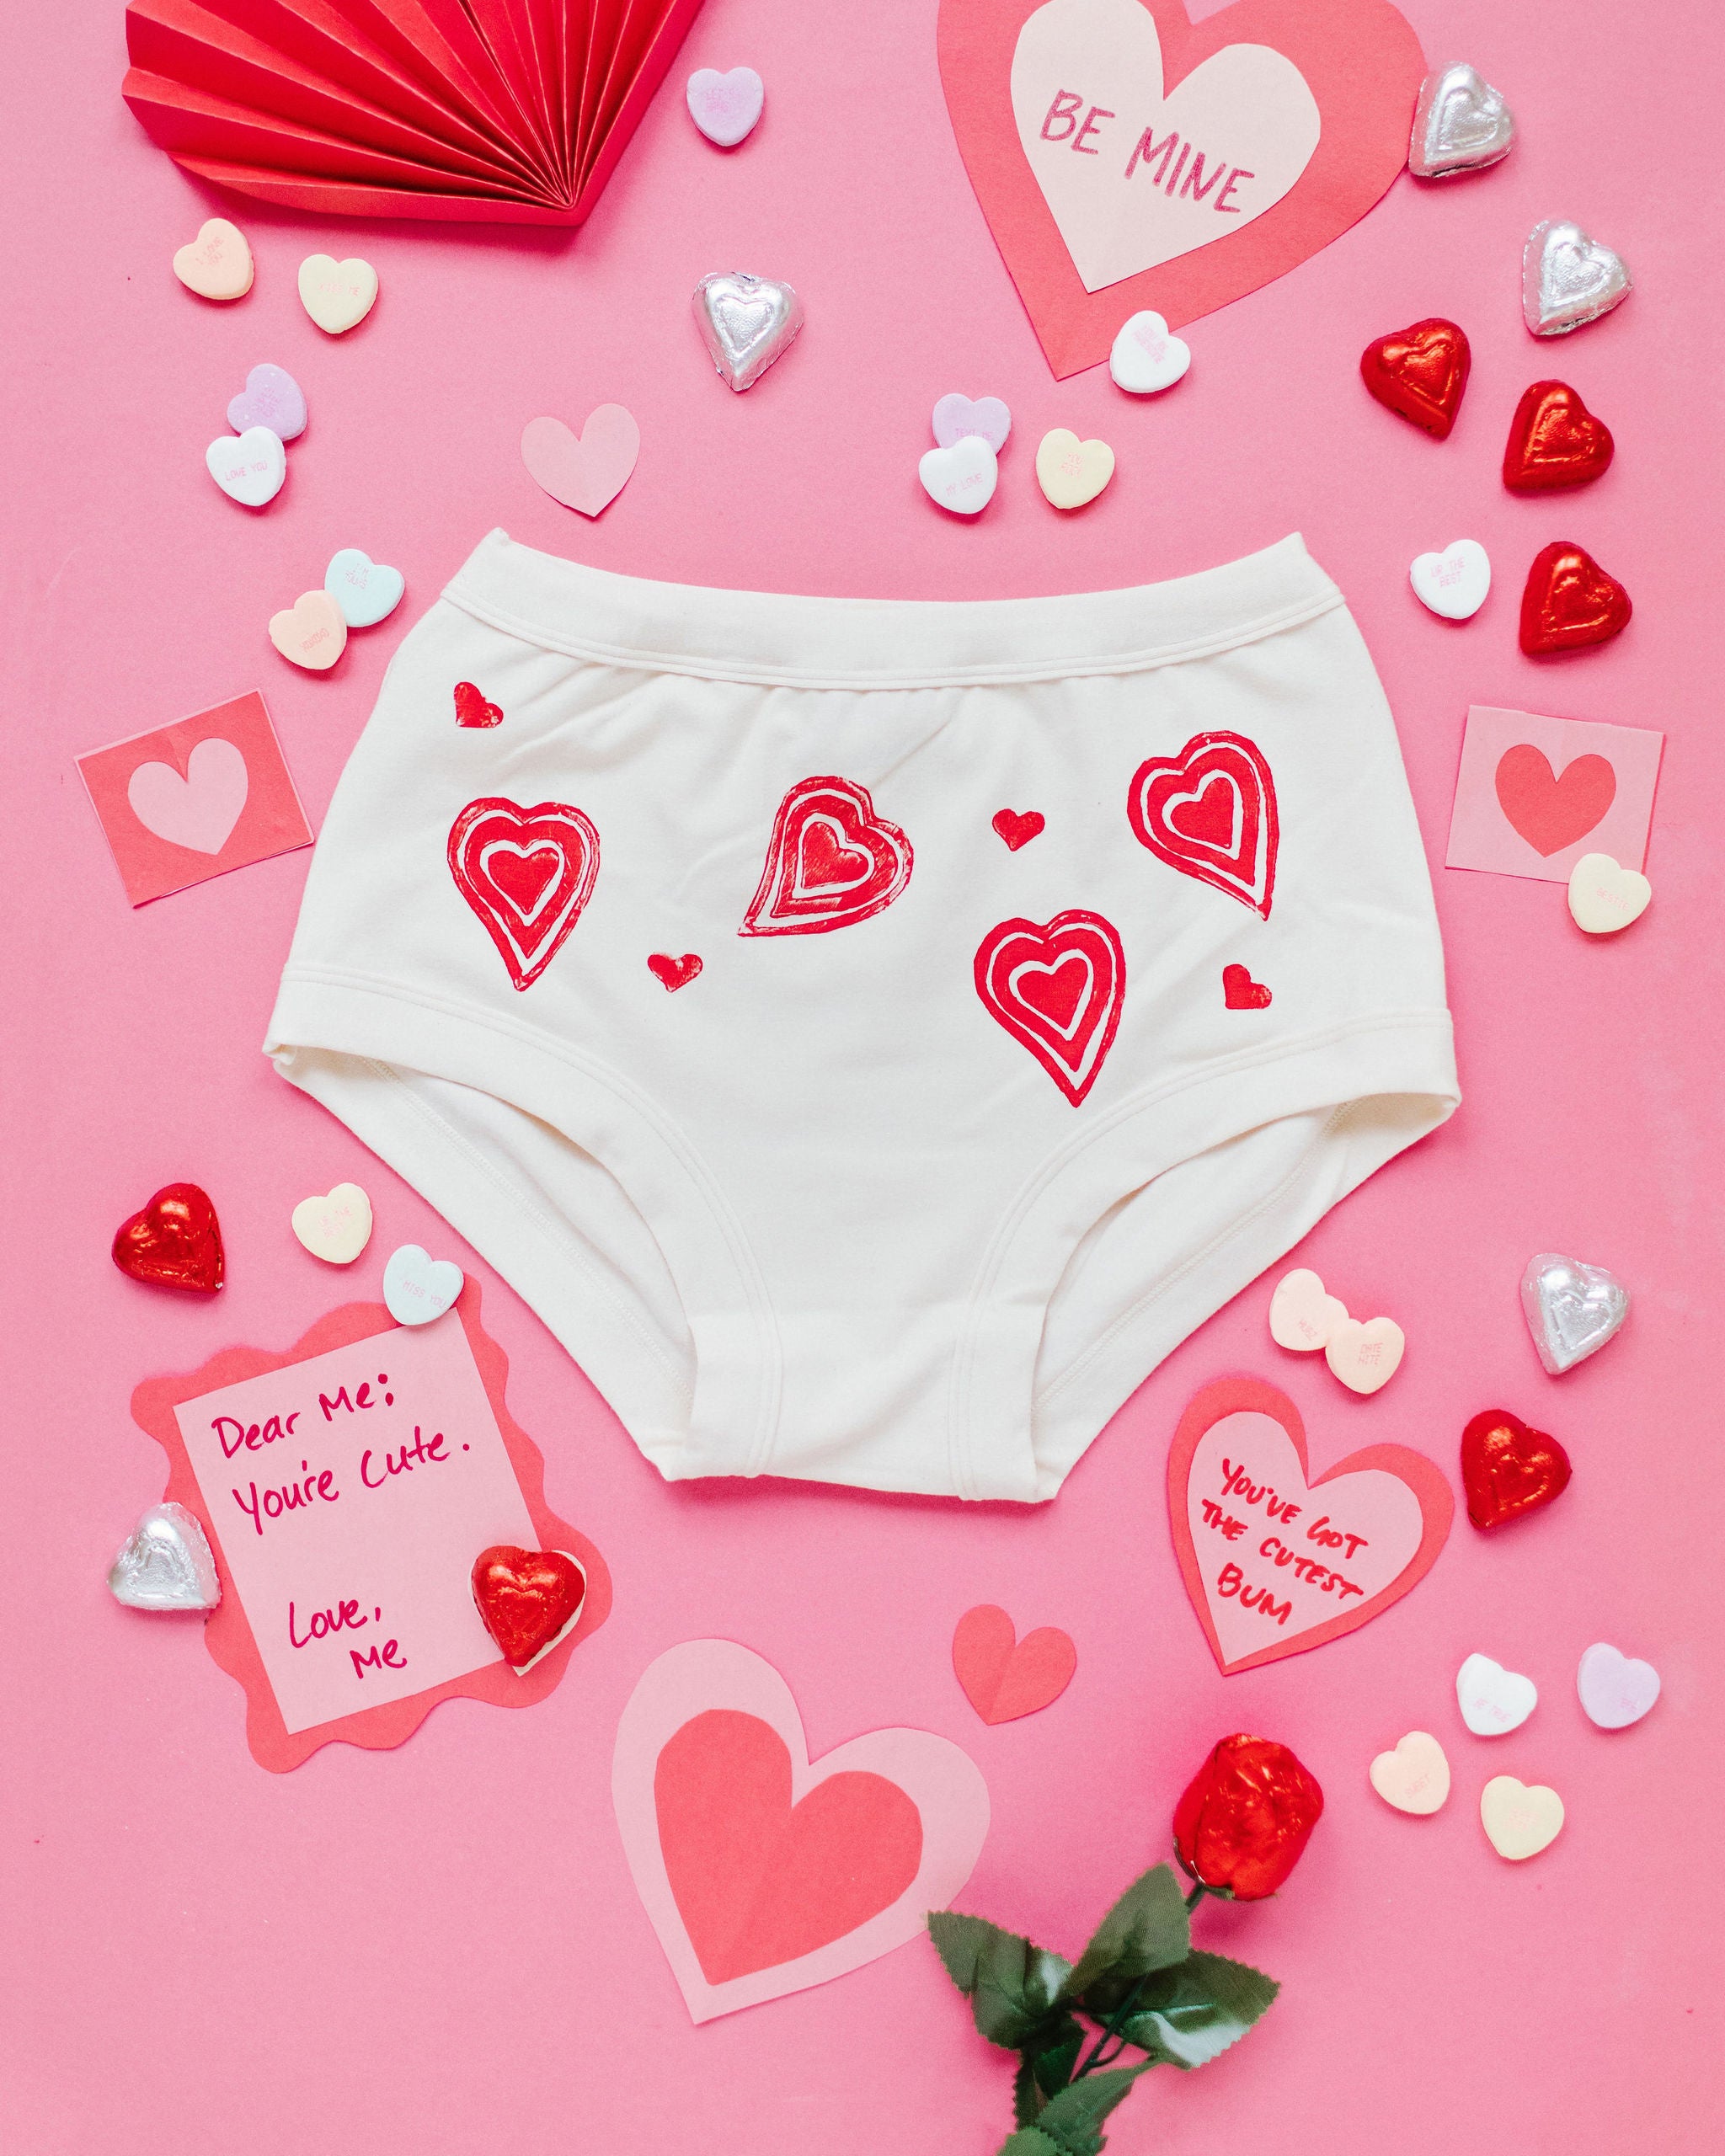 Flat lay of Thunderpants Original style underwear with hand printed red hearts on Vanilla.